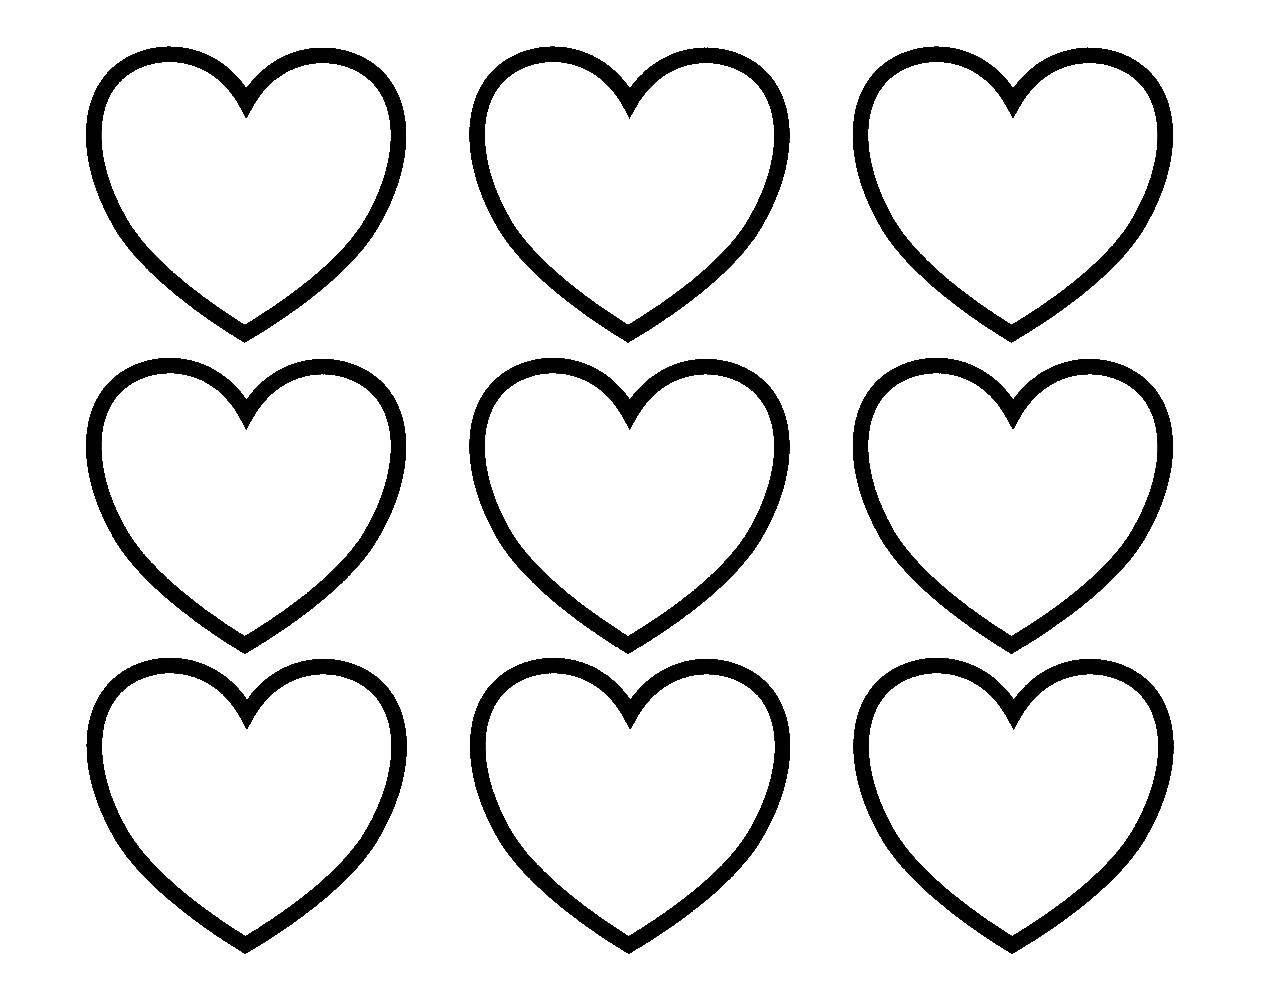 Coloring Paint the hearts. Category Hearts. Tags:  Heart, love.